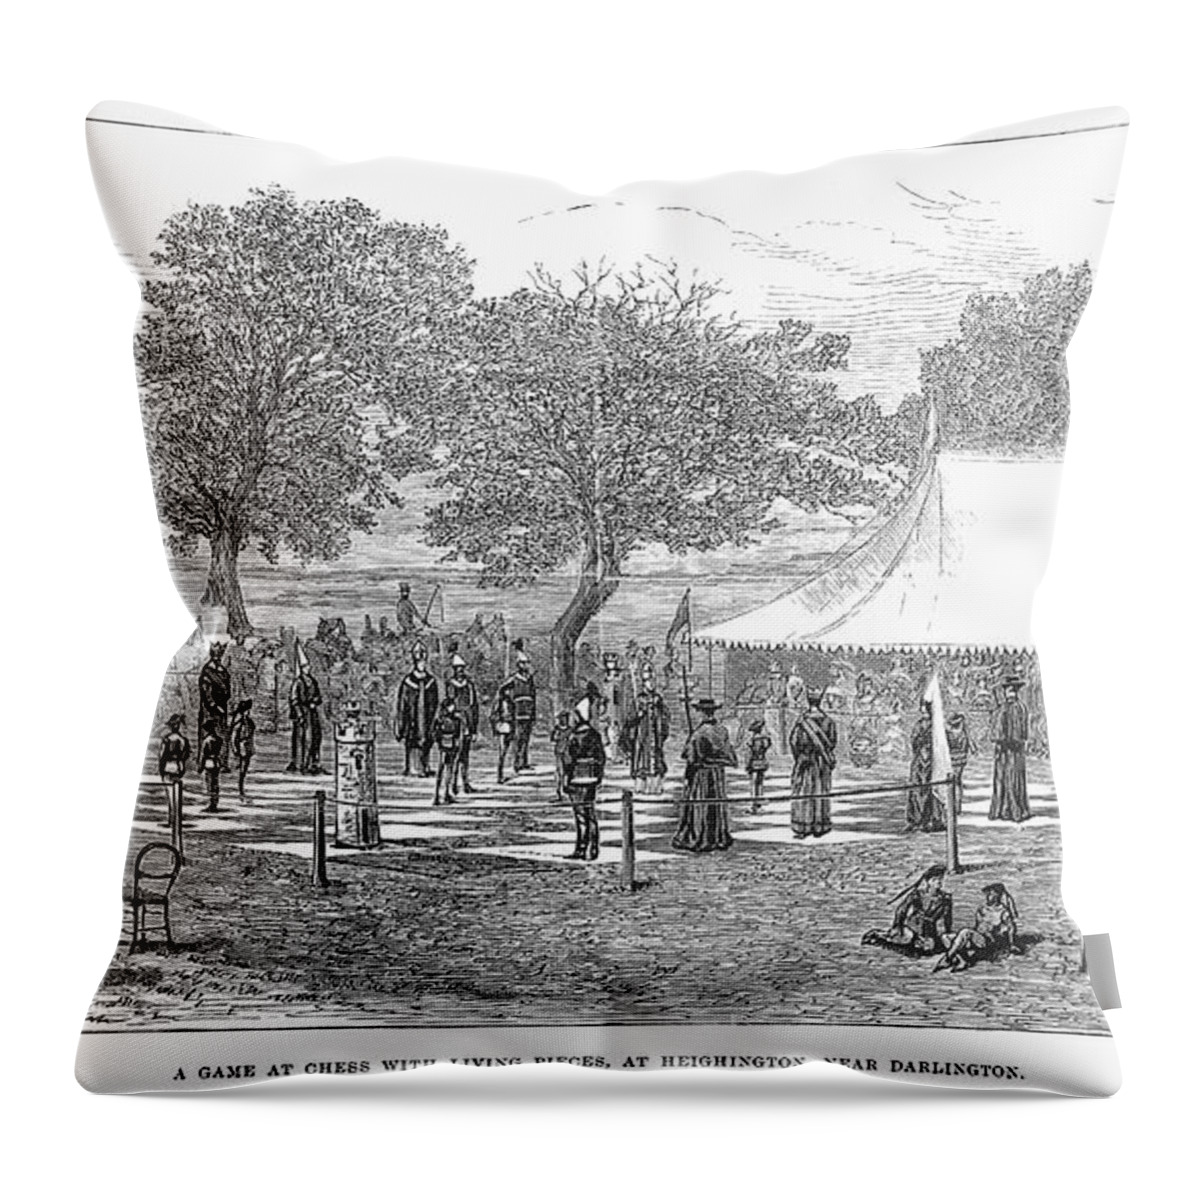 1882 Throw Pillow featuring the photograph Life-sized Chess, 1882 by Granger